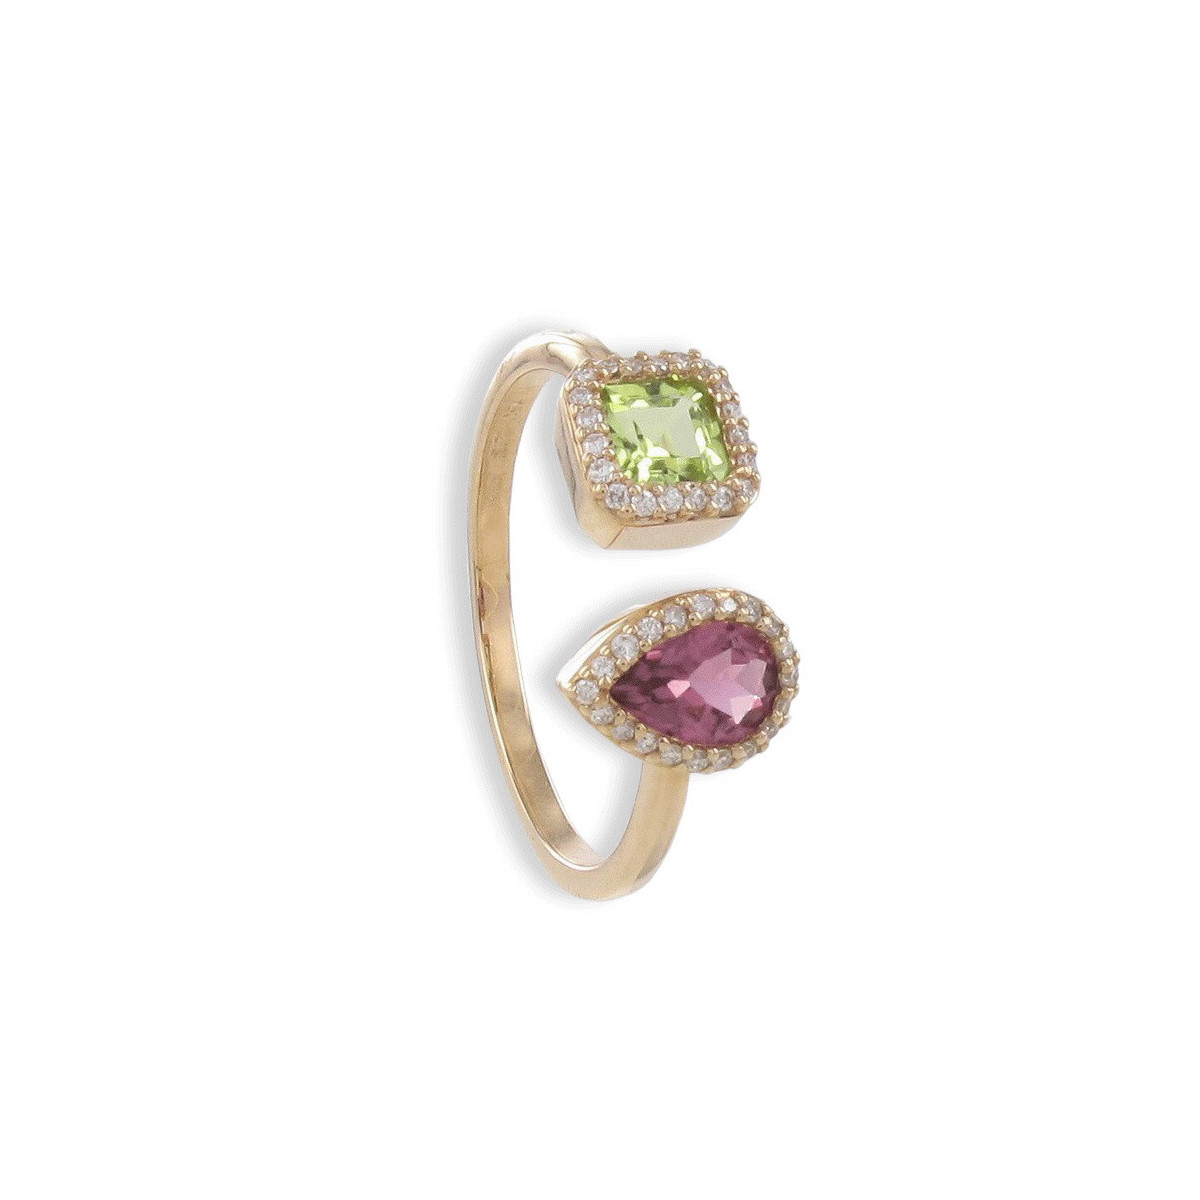 ROSE GOLD RING WITH 2 COLORED STONES